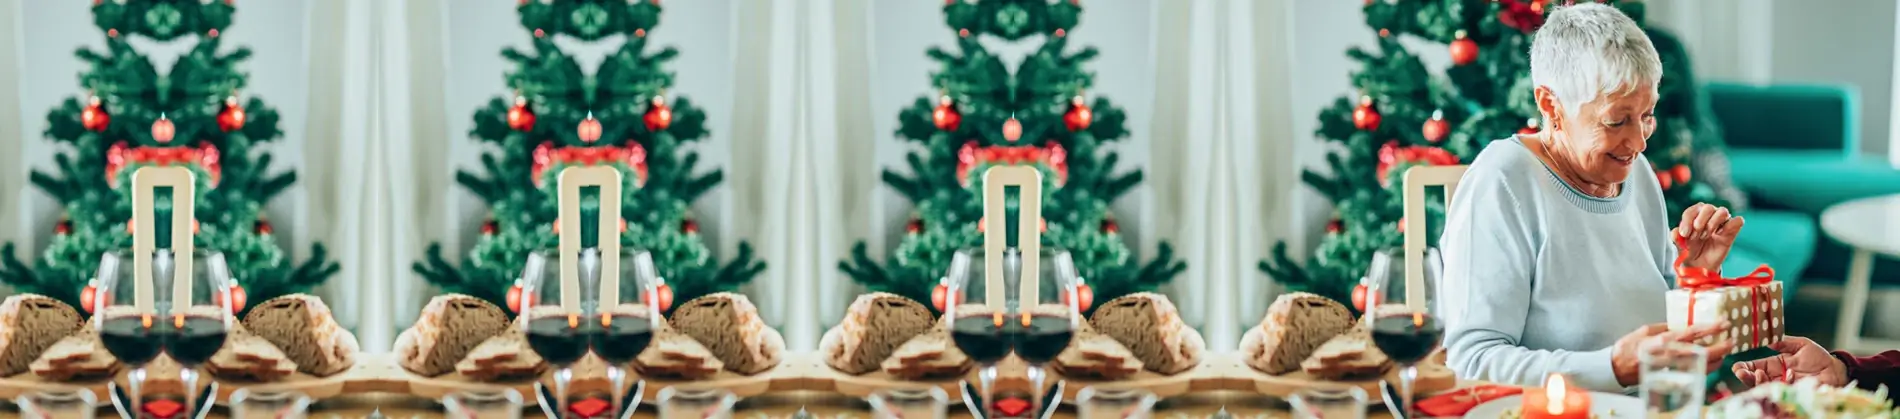 How to have a dementia-friendly Christmas